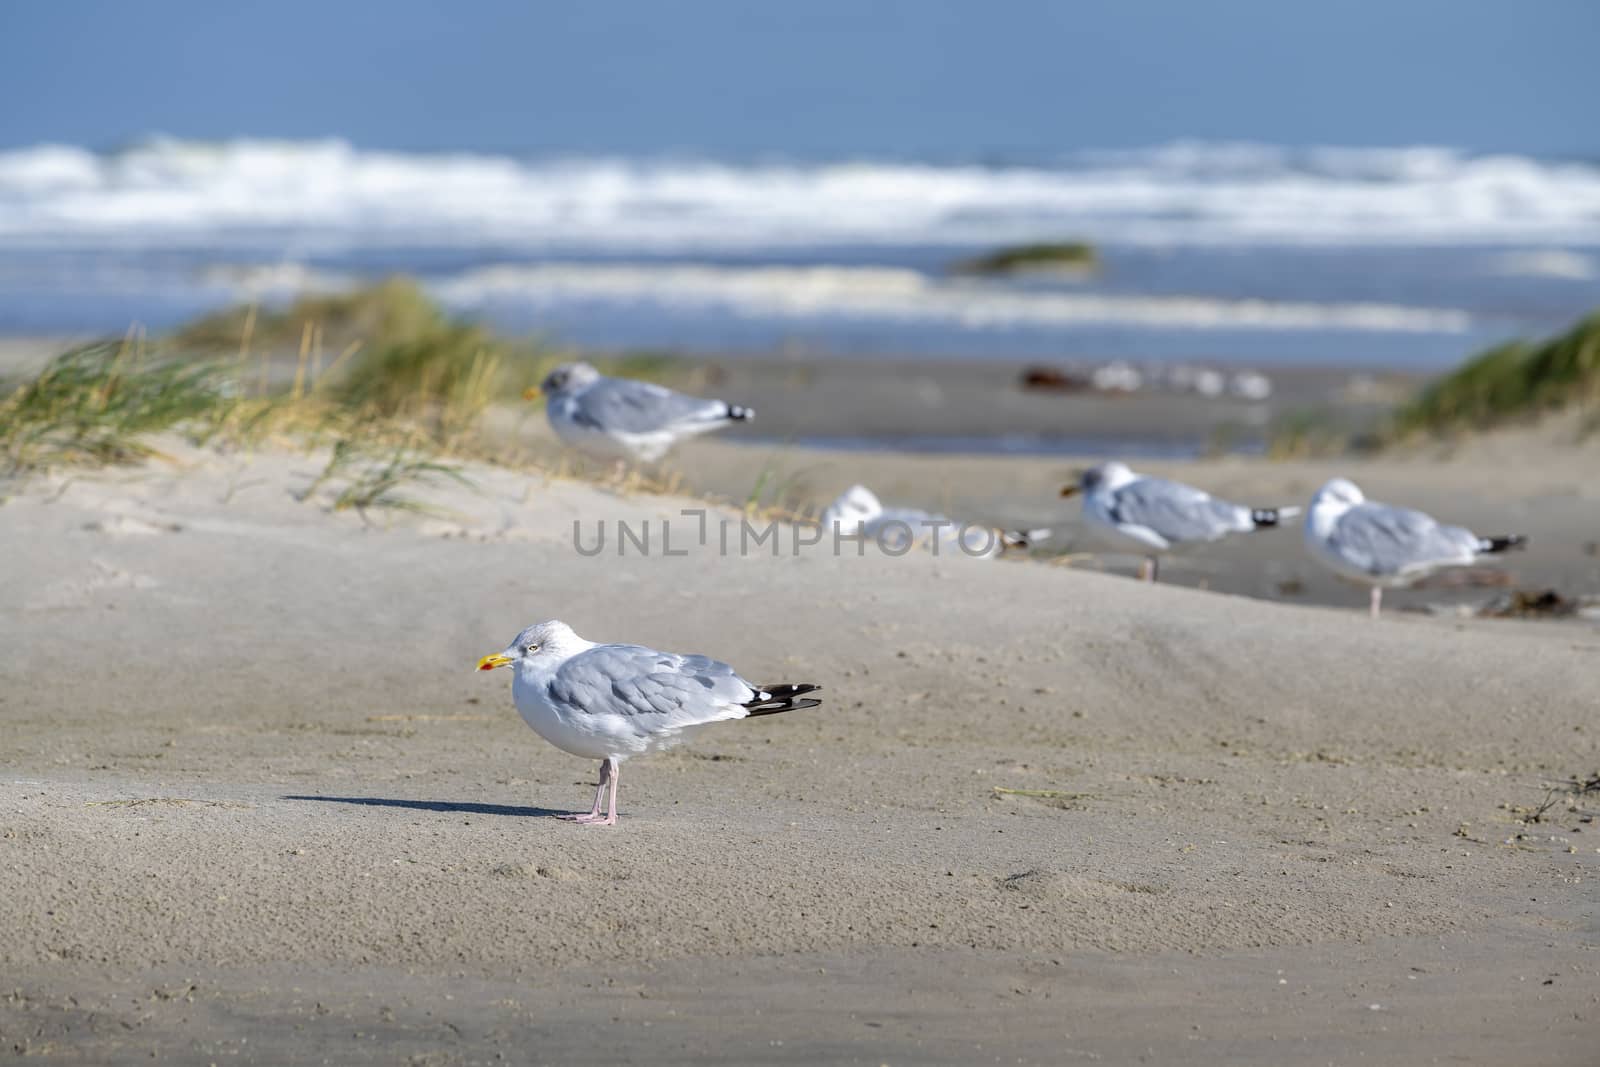 Sea gulls on the Beach of the frisian island of Terschelling 
 by Tofotografie